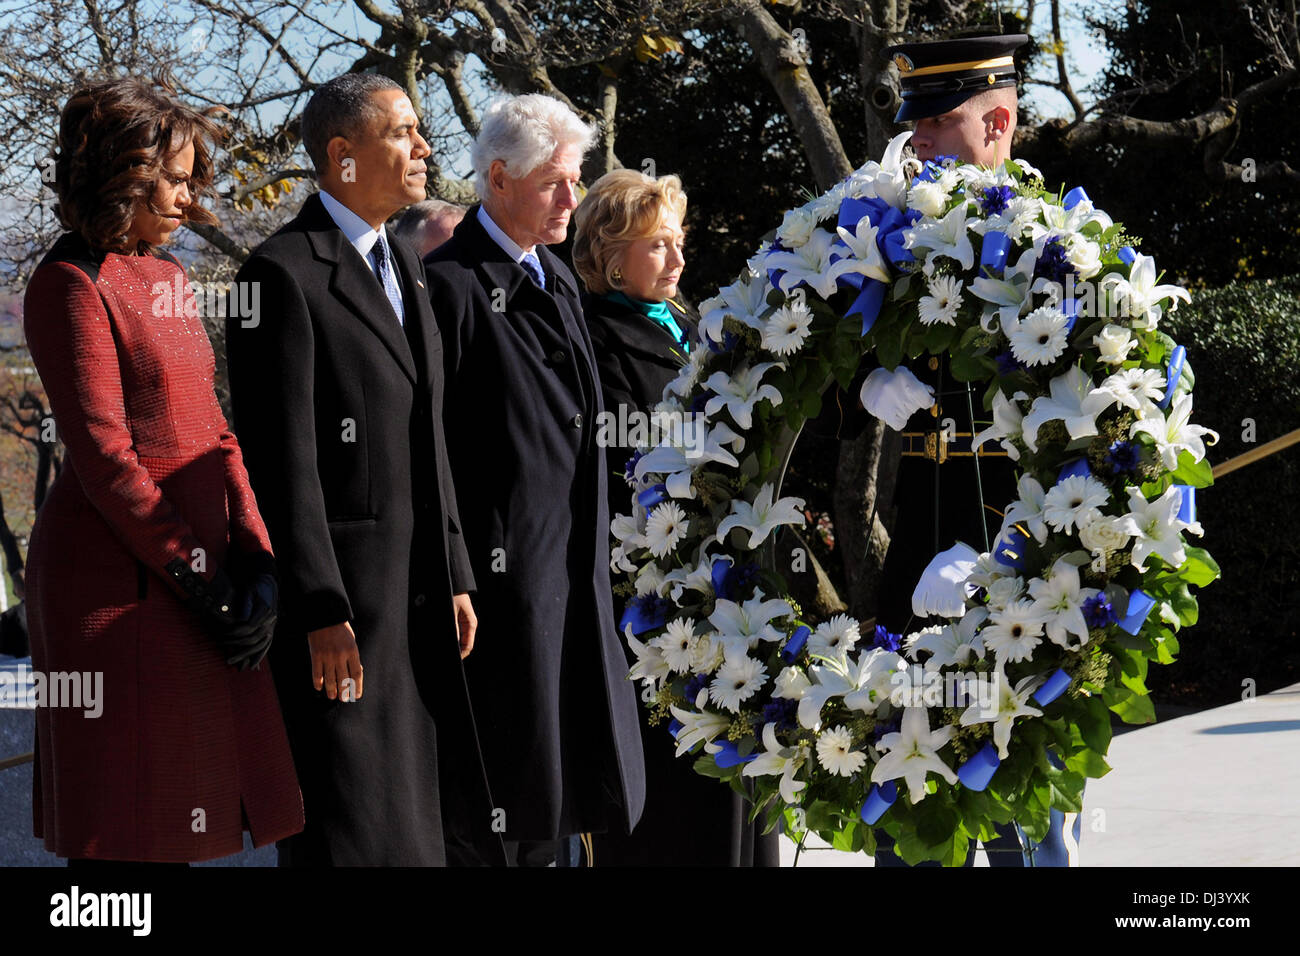 US President Barack Obama along with first lady Michelle Obama, former president Bill Clinton and former Secretary of State Hillary Clinton lay a wreath at the grave site of John F. Kennedy on the 50th Anniversary of his death at Arlington National Cemetery. Stock Photo